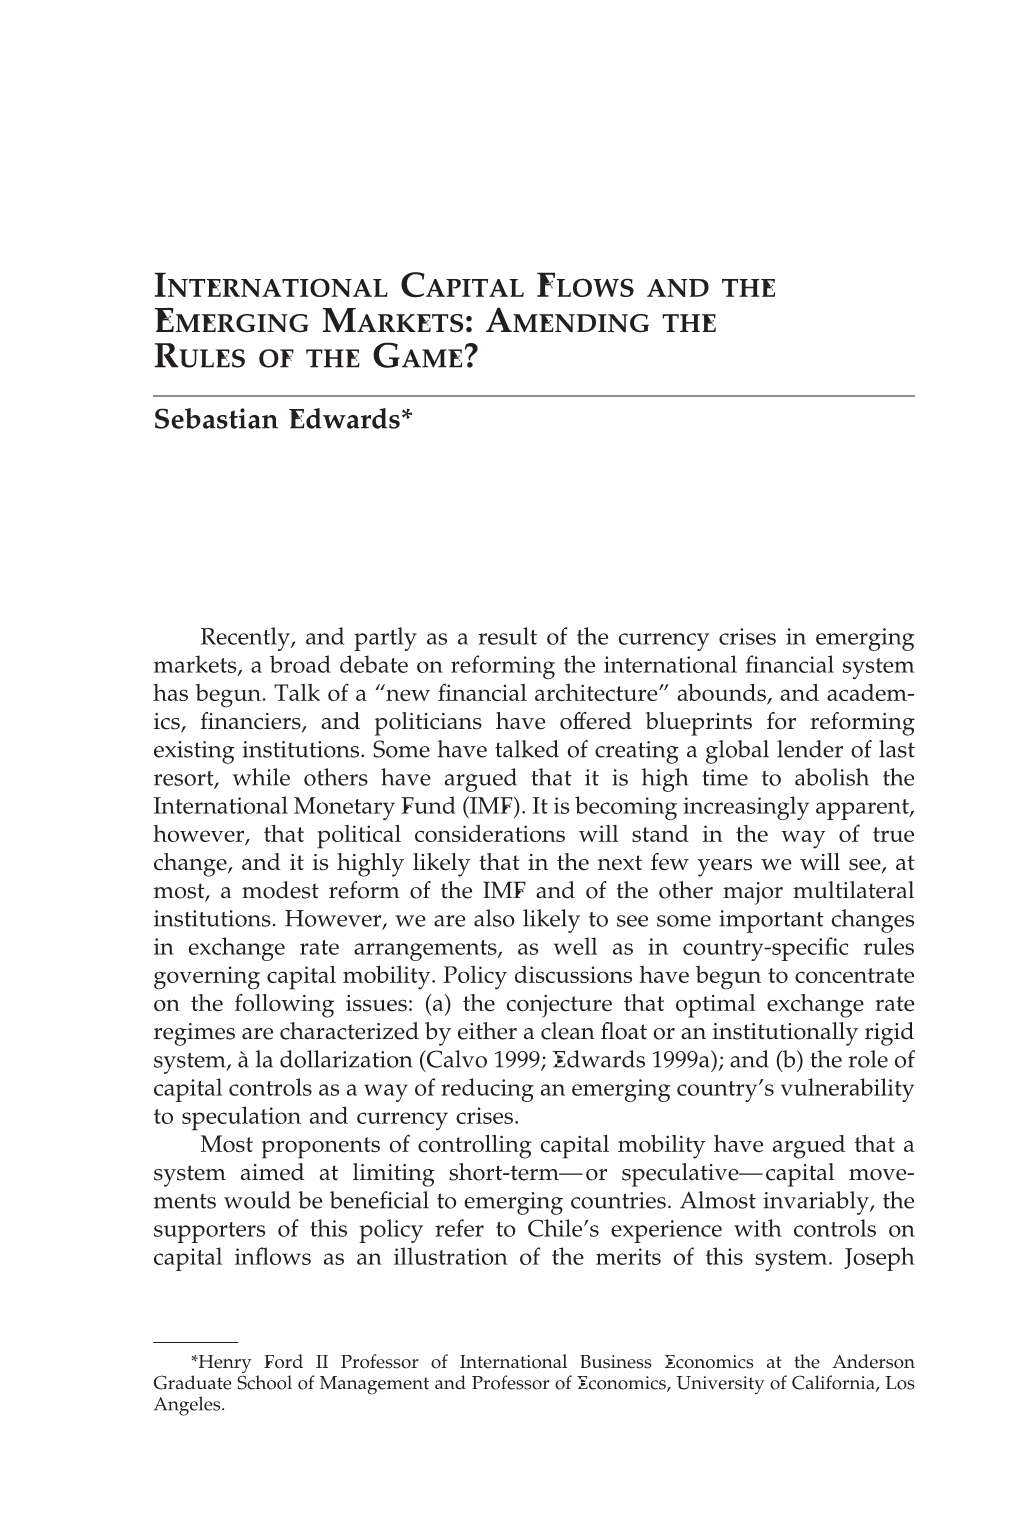 International Capital Flows and the Emerging Markets:Amending the Rules of the Game?